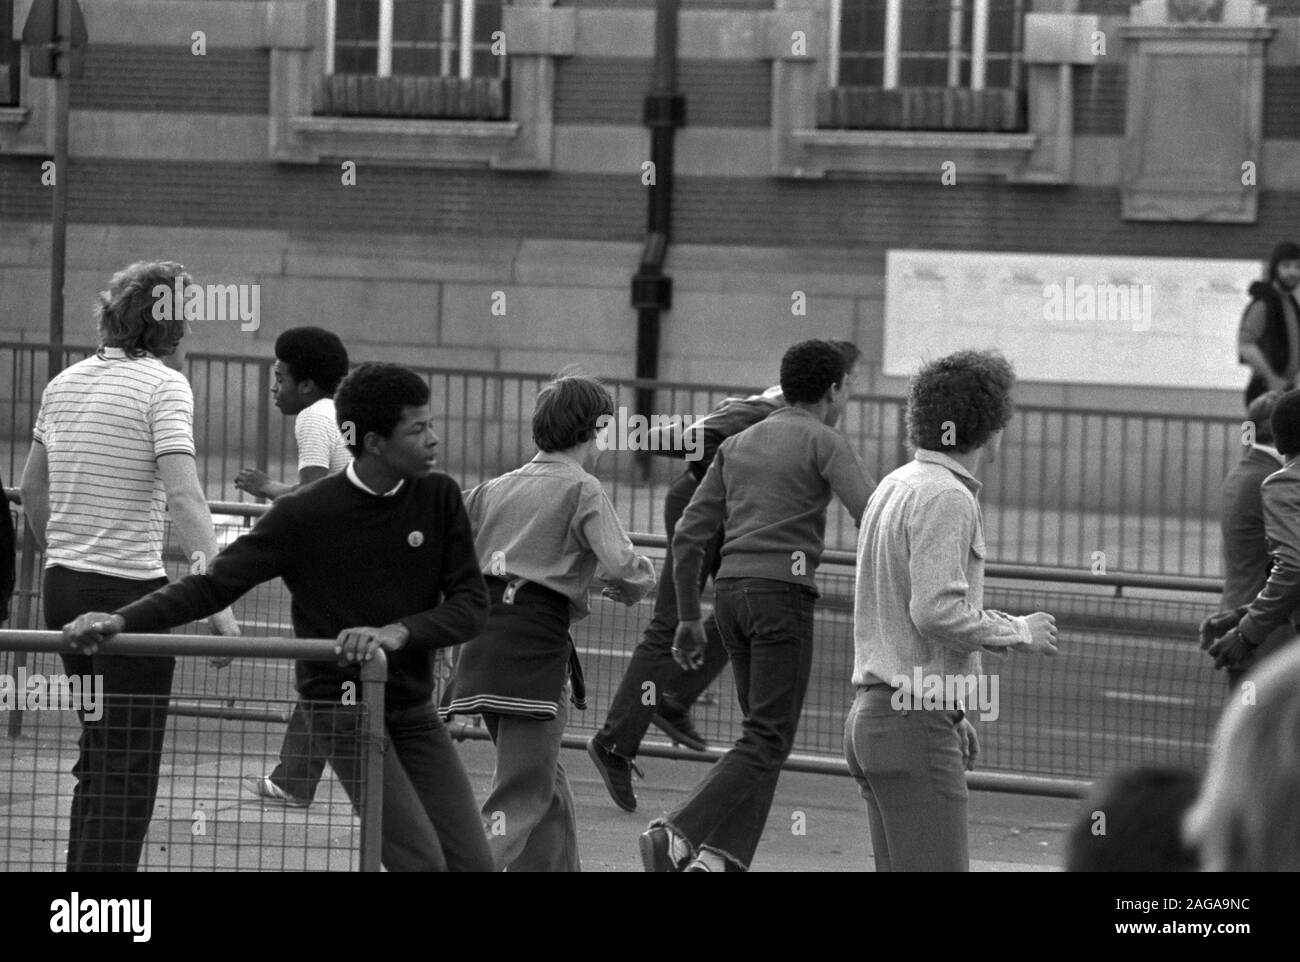 The Brixton Riots in London. Stock Photo